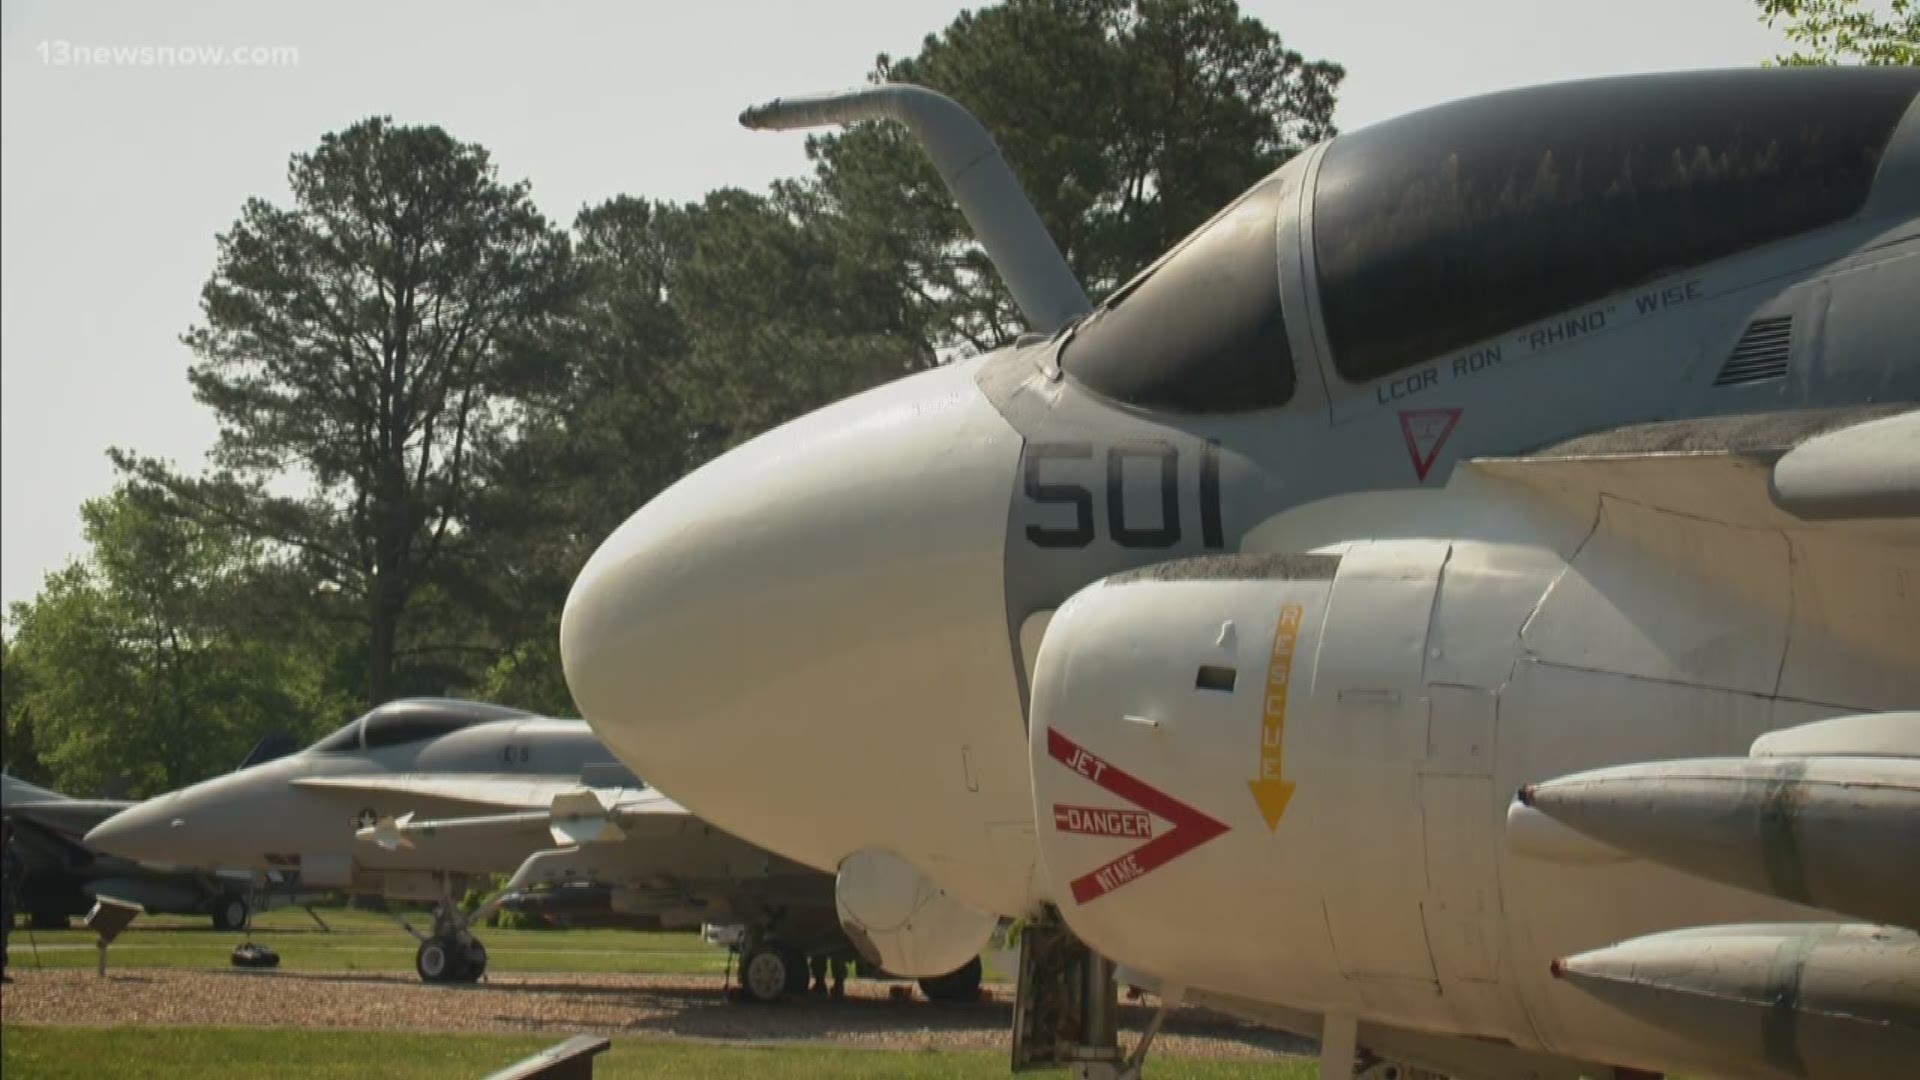 13News Now military reporter Mike Gooding looks back at the history of NAS Oceana. There has been triumph, there has been tragedy, but through it all, there has been a commitment to excellence.